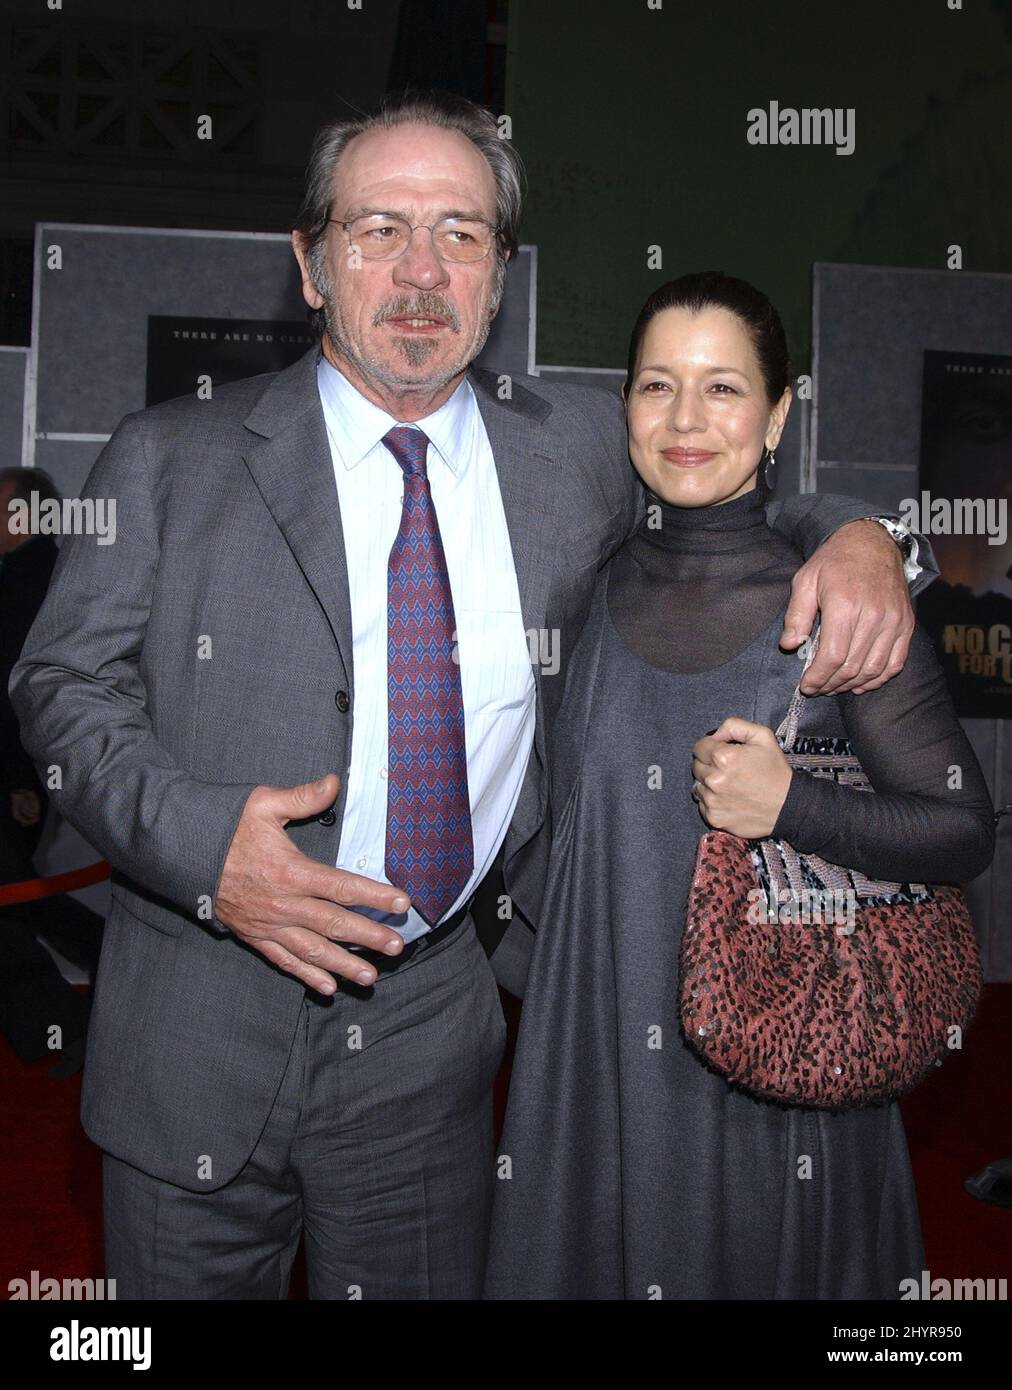 Tommy Lee Jones and wife Dawn arrive at the premiere for No Country For Old Men, held at the El Capitan Theatre, Los Angeles, USA Stock Photo